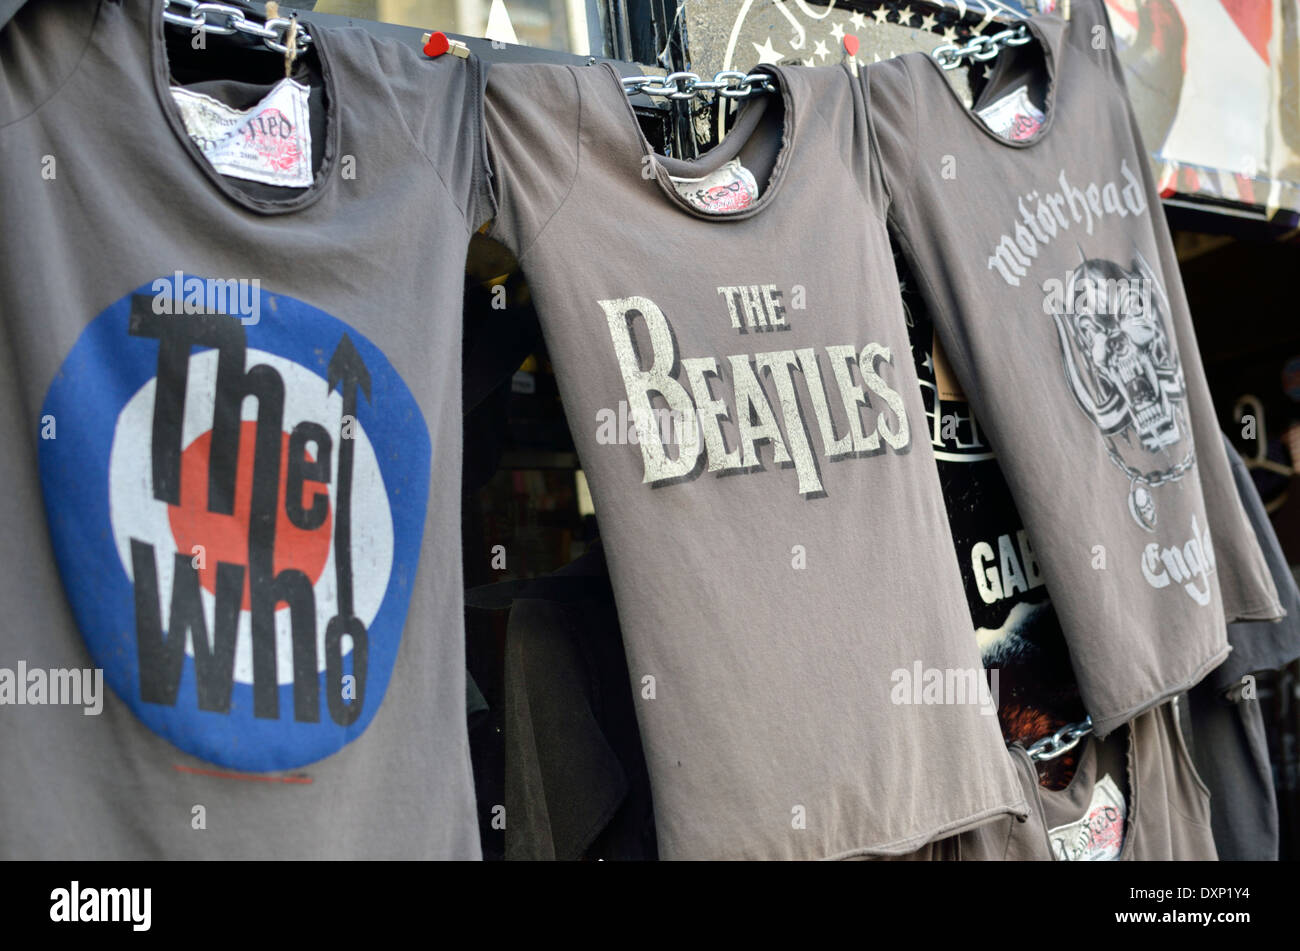 Classic British pop group logos on t-shirts in a market, London, UK Stock Photo